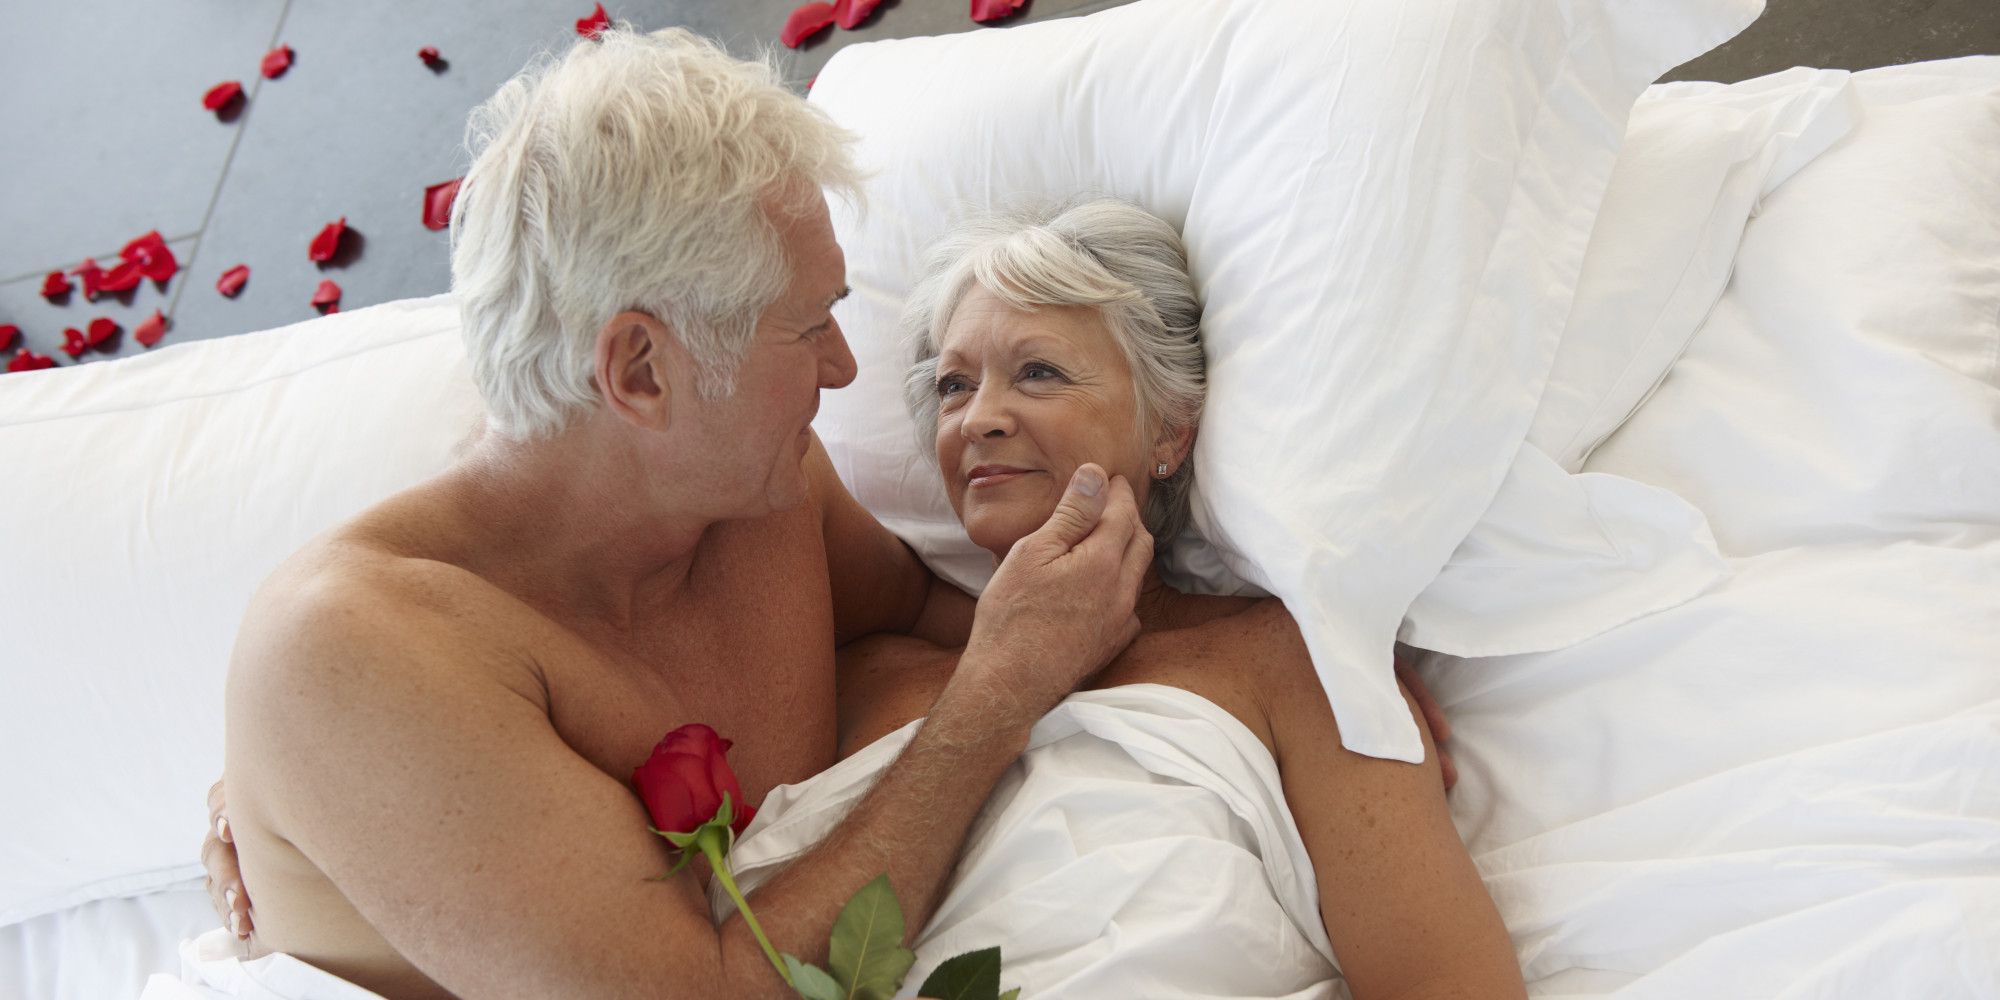 A photo of a older couple in bed together surround by red roses